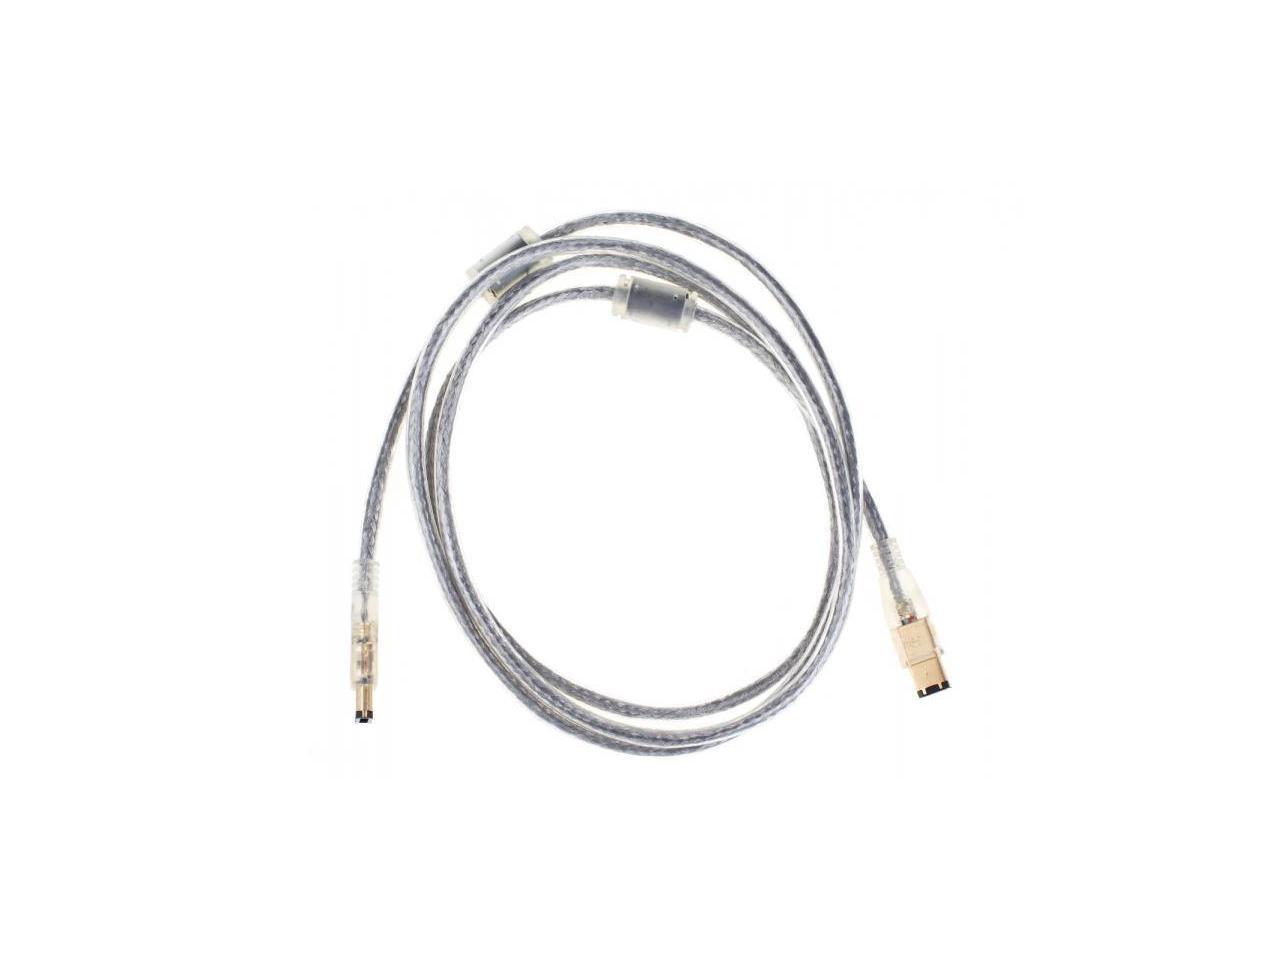 NEON FireWire IEEE 1394 Cable 6-pin male to 6-pin male 6ft High Speed Gold Plated. Model S-PC-1051A